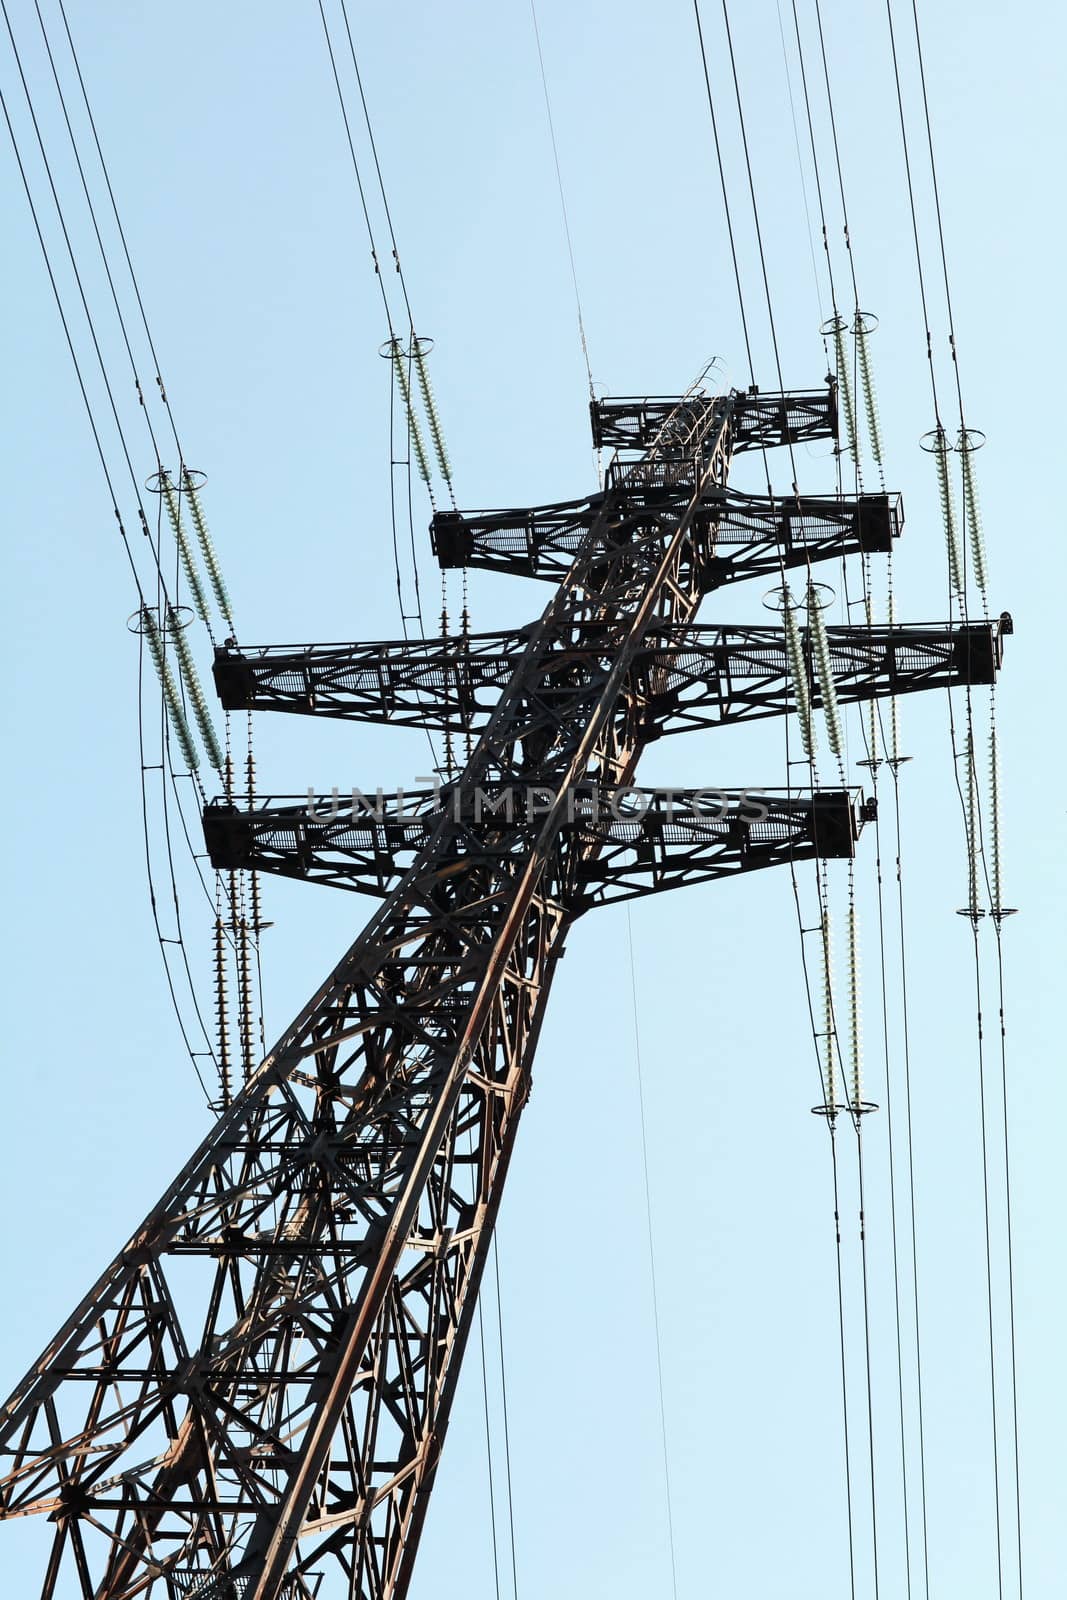 Power lines and electricity pylon  against blue sky